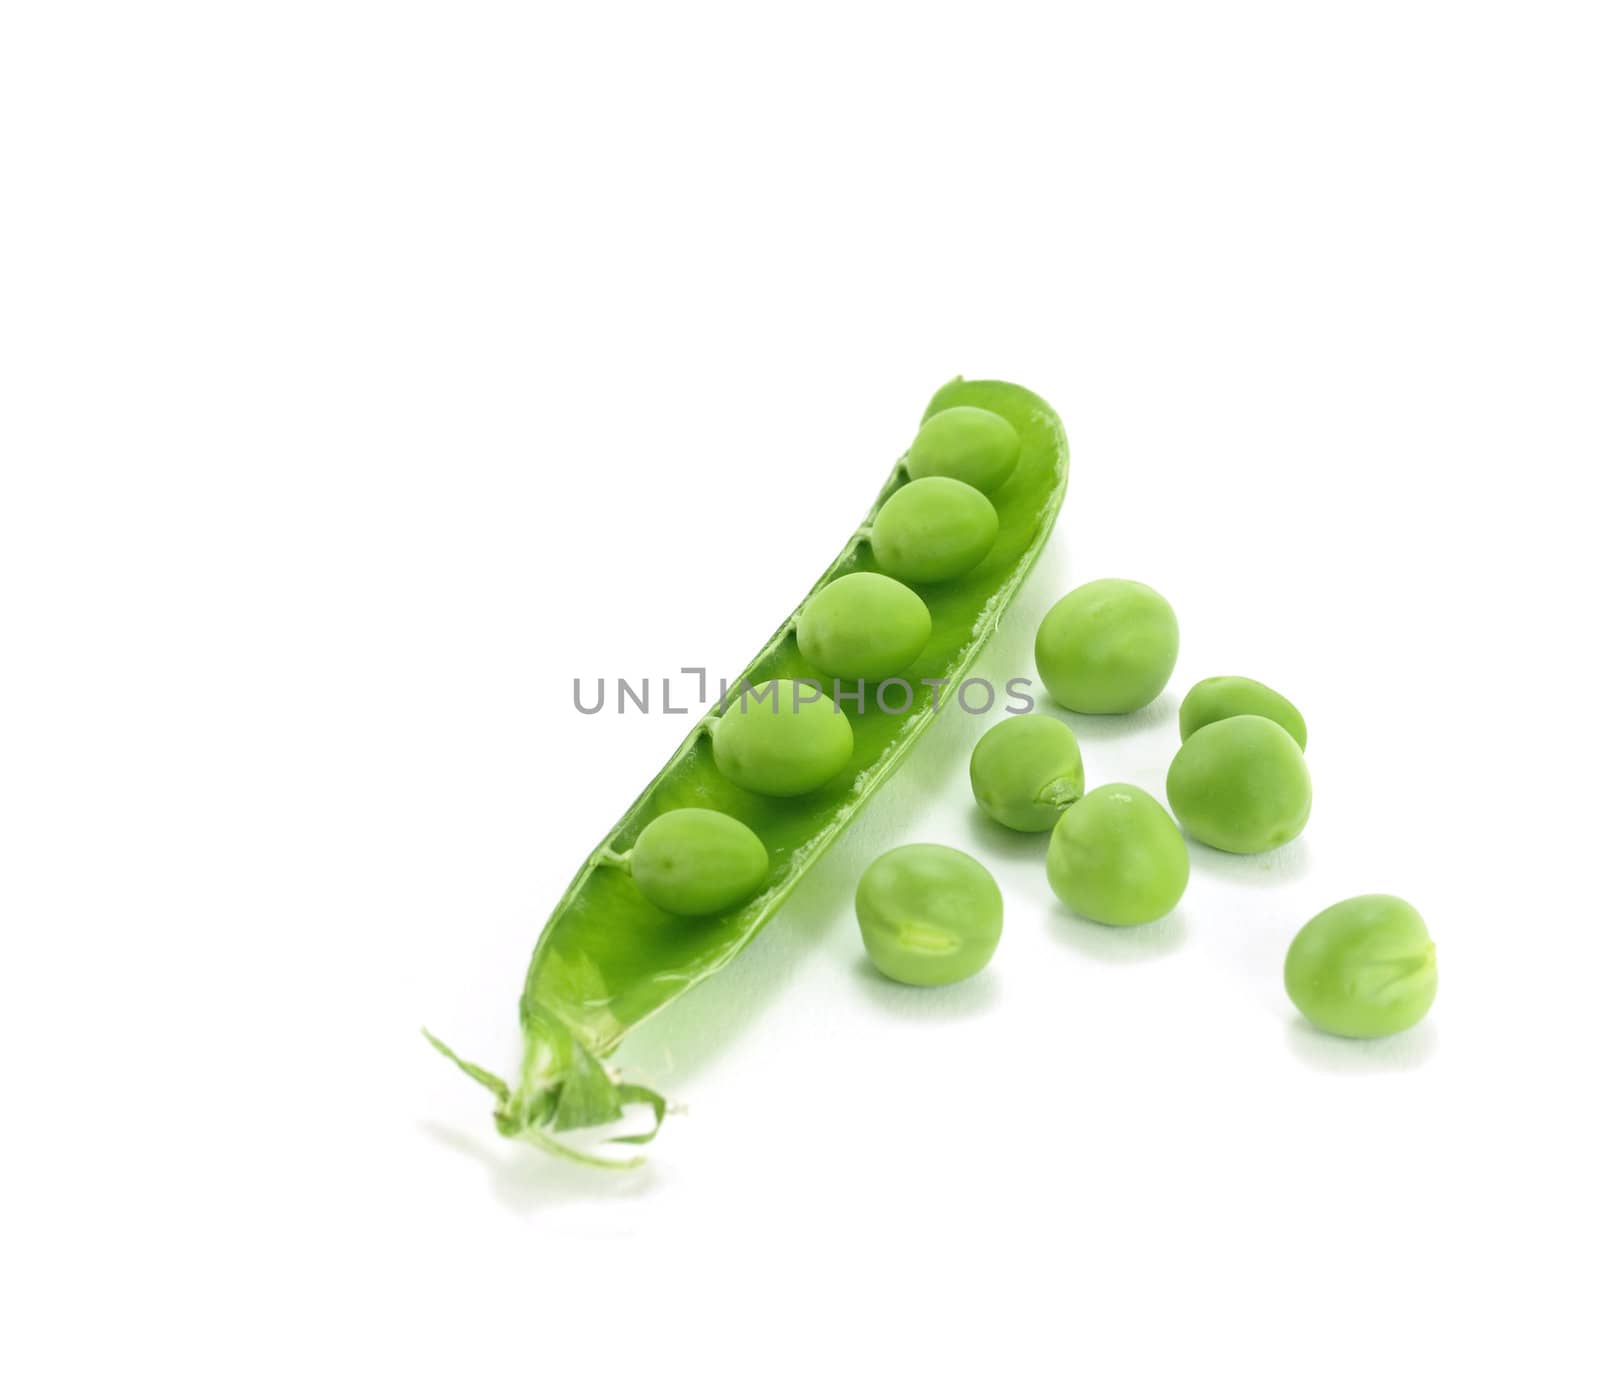 green peas background by Ric510